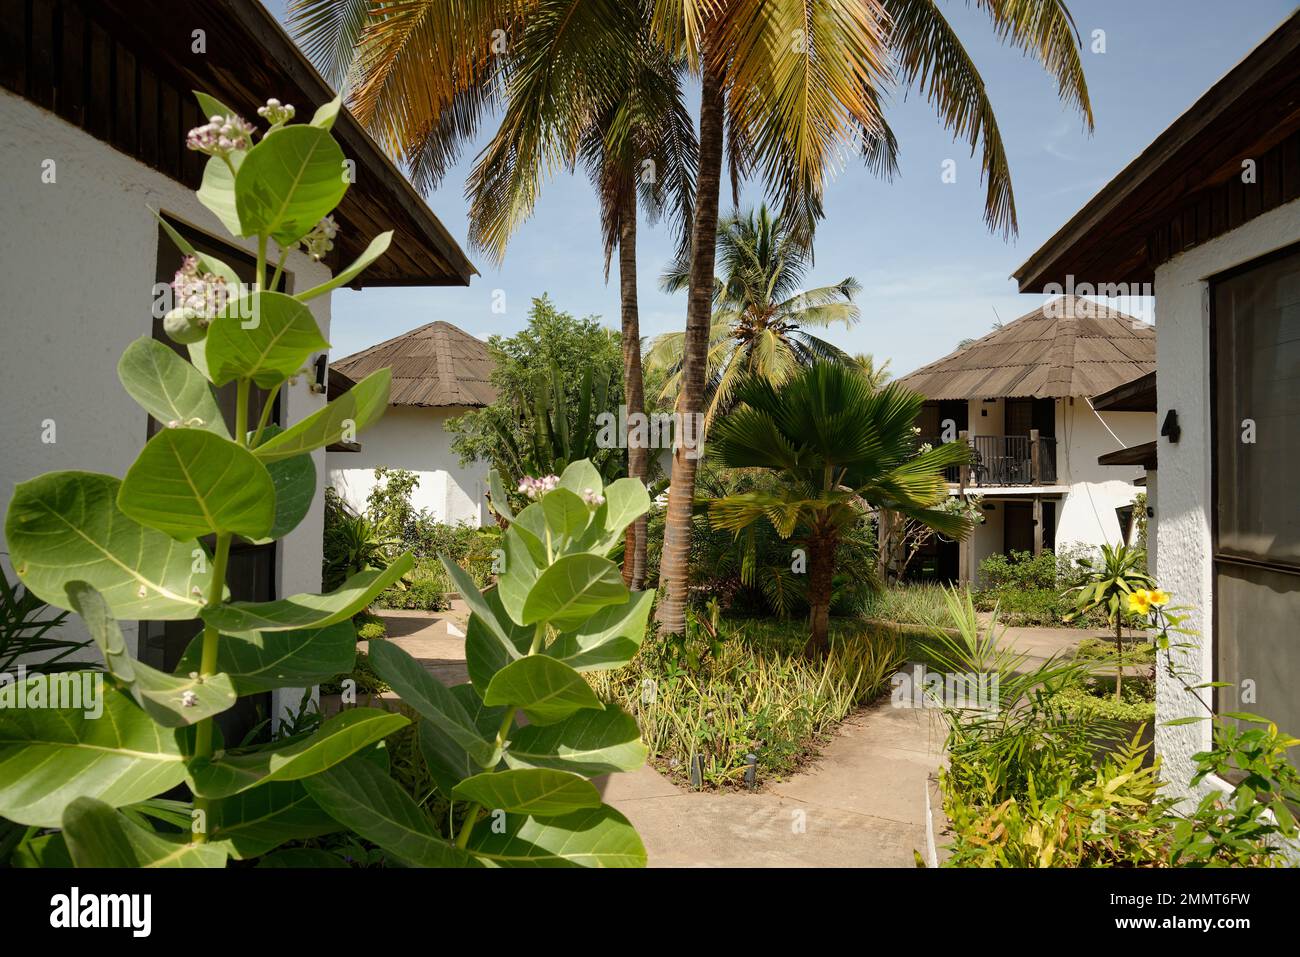 A verdant hotel garden in the Gambia, West Africa. A variety of sub tropical plants. Stock Photo